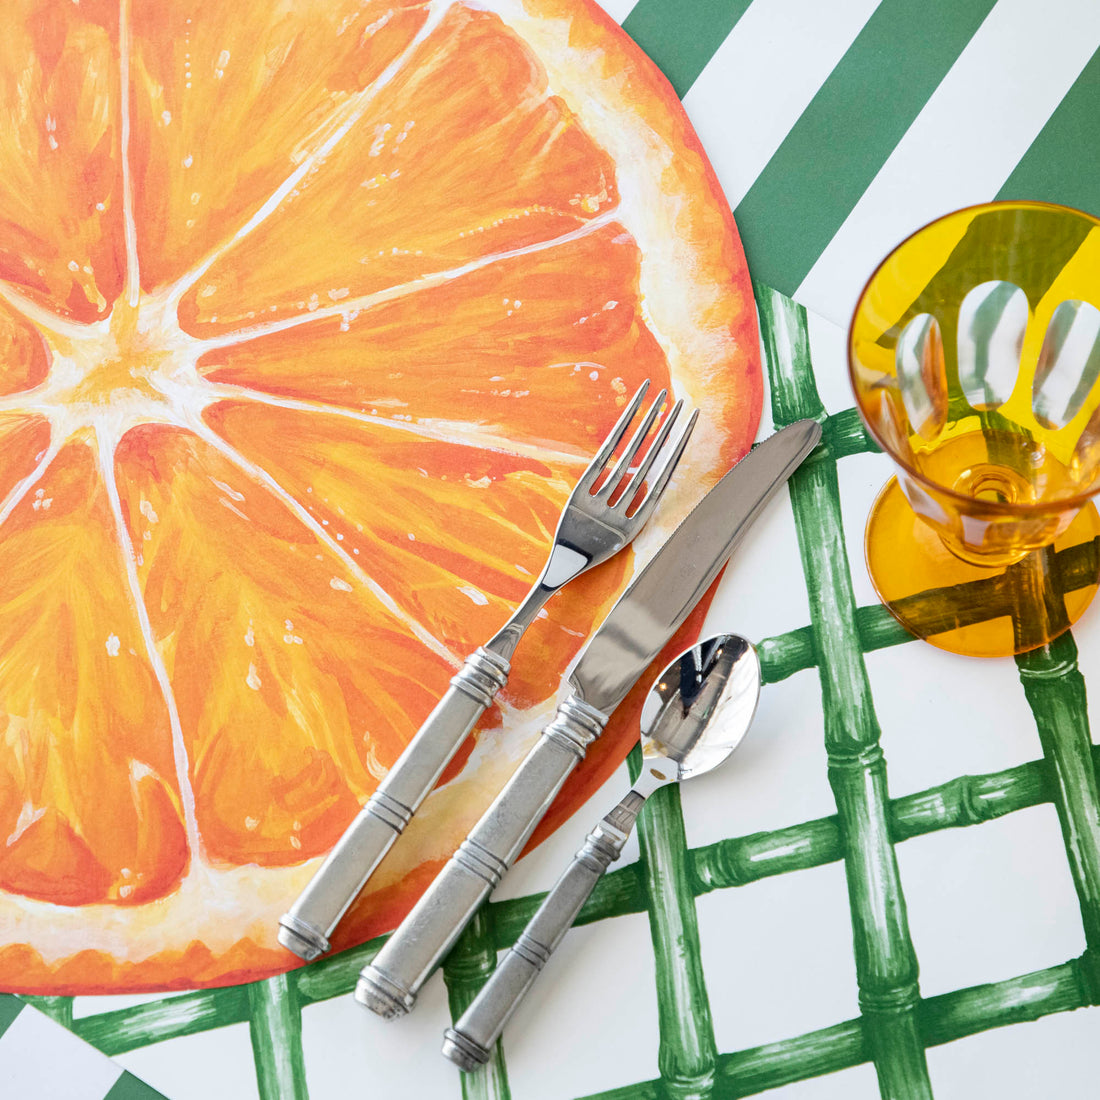 A plate with a slice of orange on a Green Lattice placemat by Hester &amp; Cook.